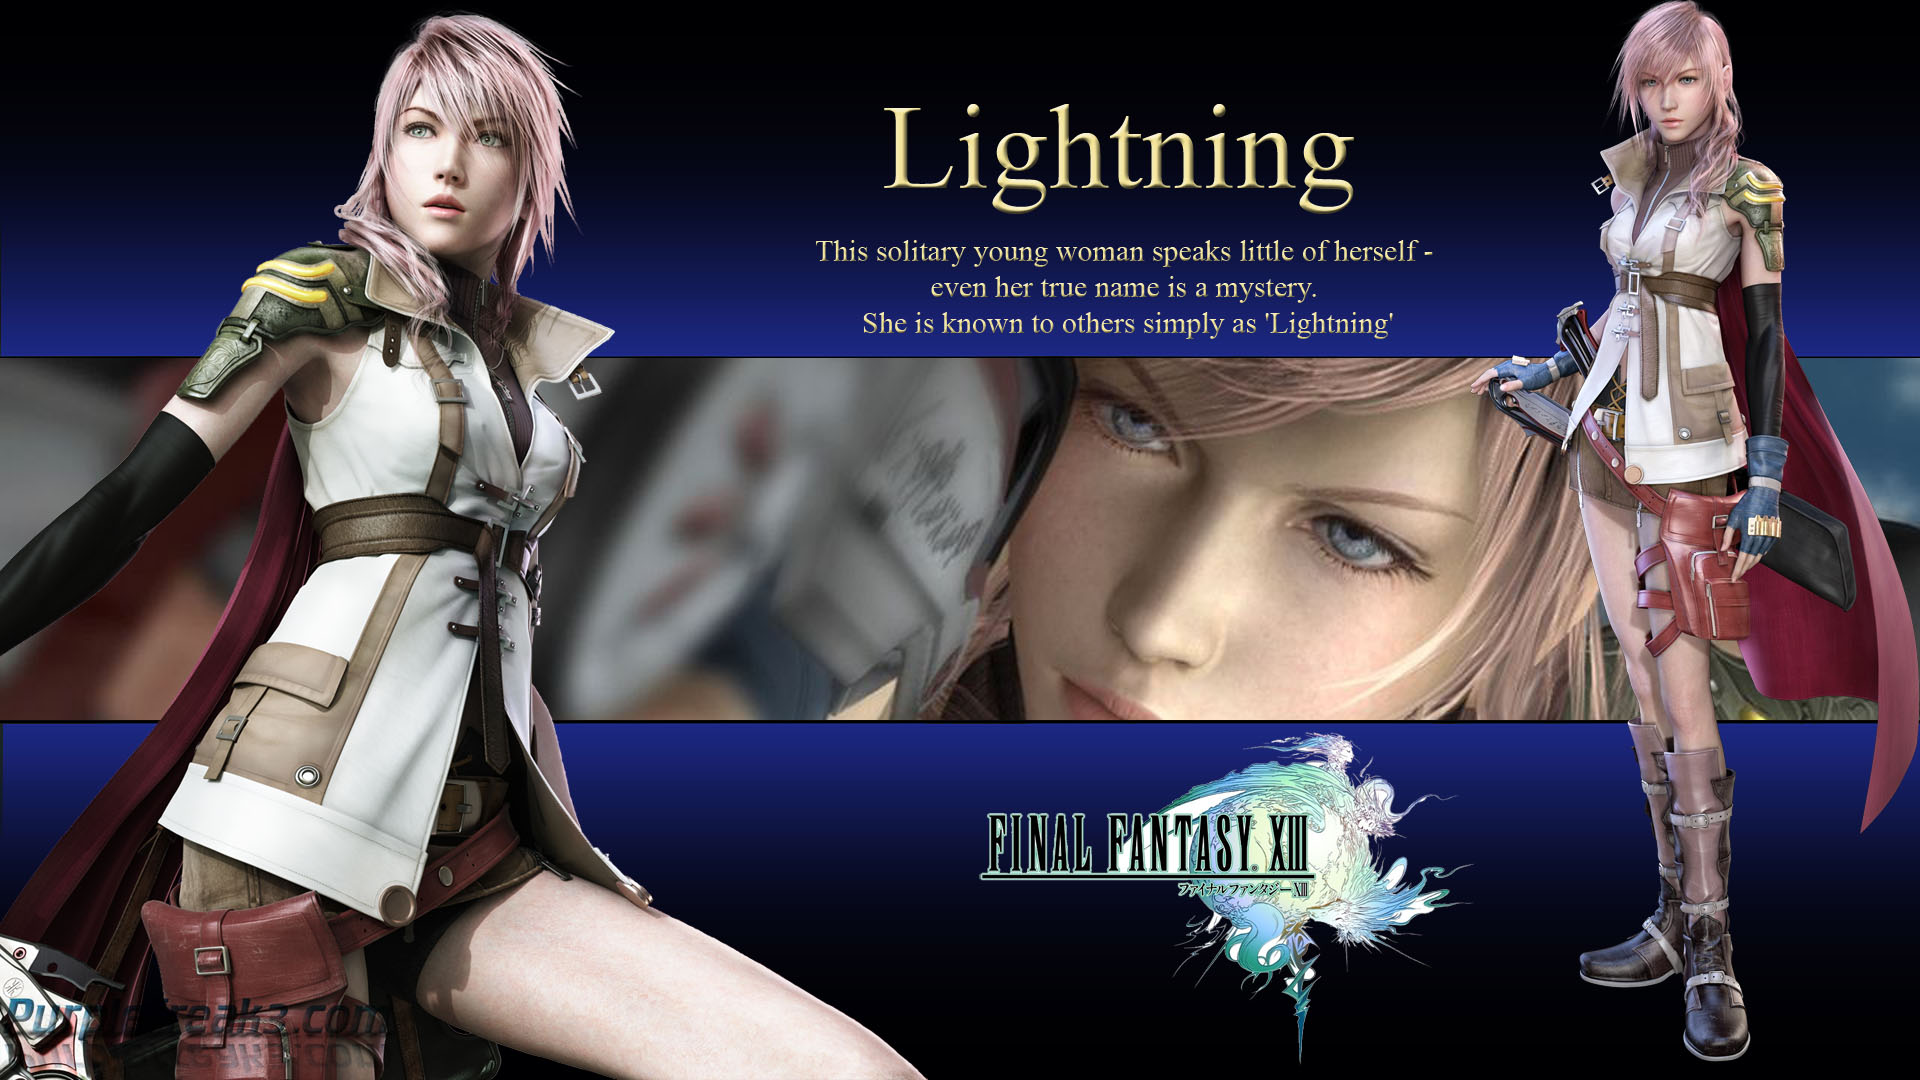 Free Download Lightning Final Fantasy Wallpaper 19x1080 For Your Desktop Mobile Tablet Explore 49 Lightning Ff Wallpaper Lightning Ff Wallpaper Ff Wallpaper Malmo Ff Wallpapers